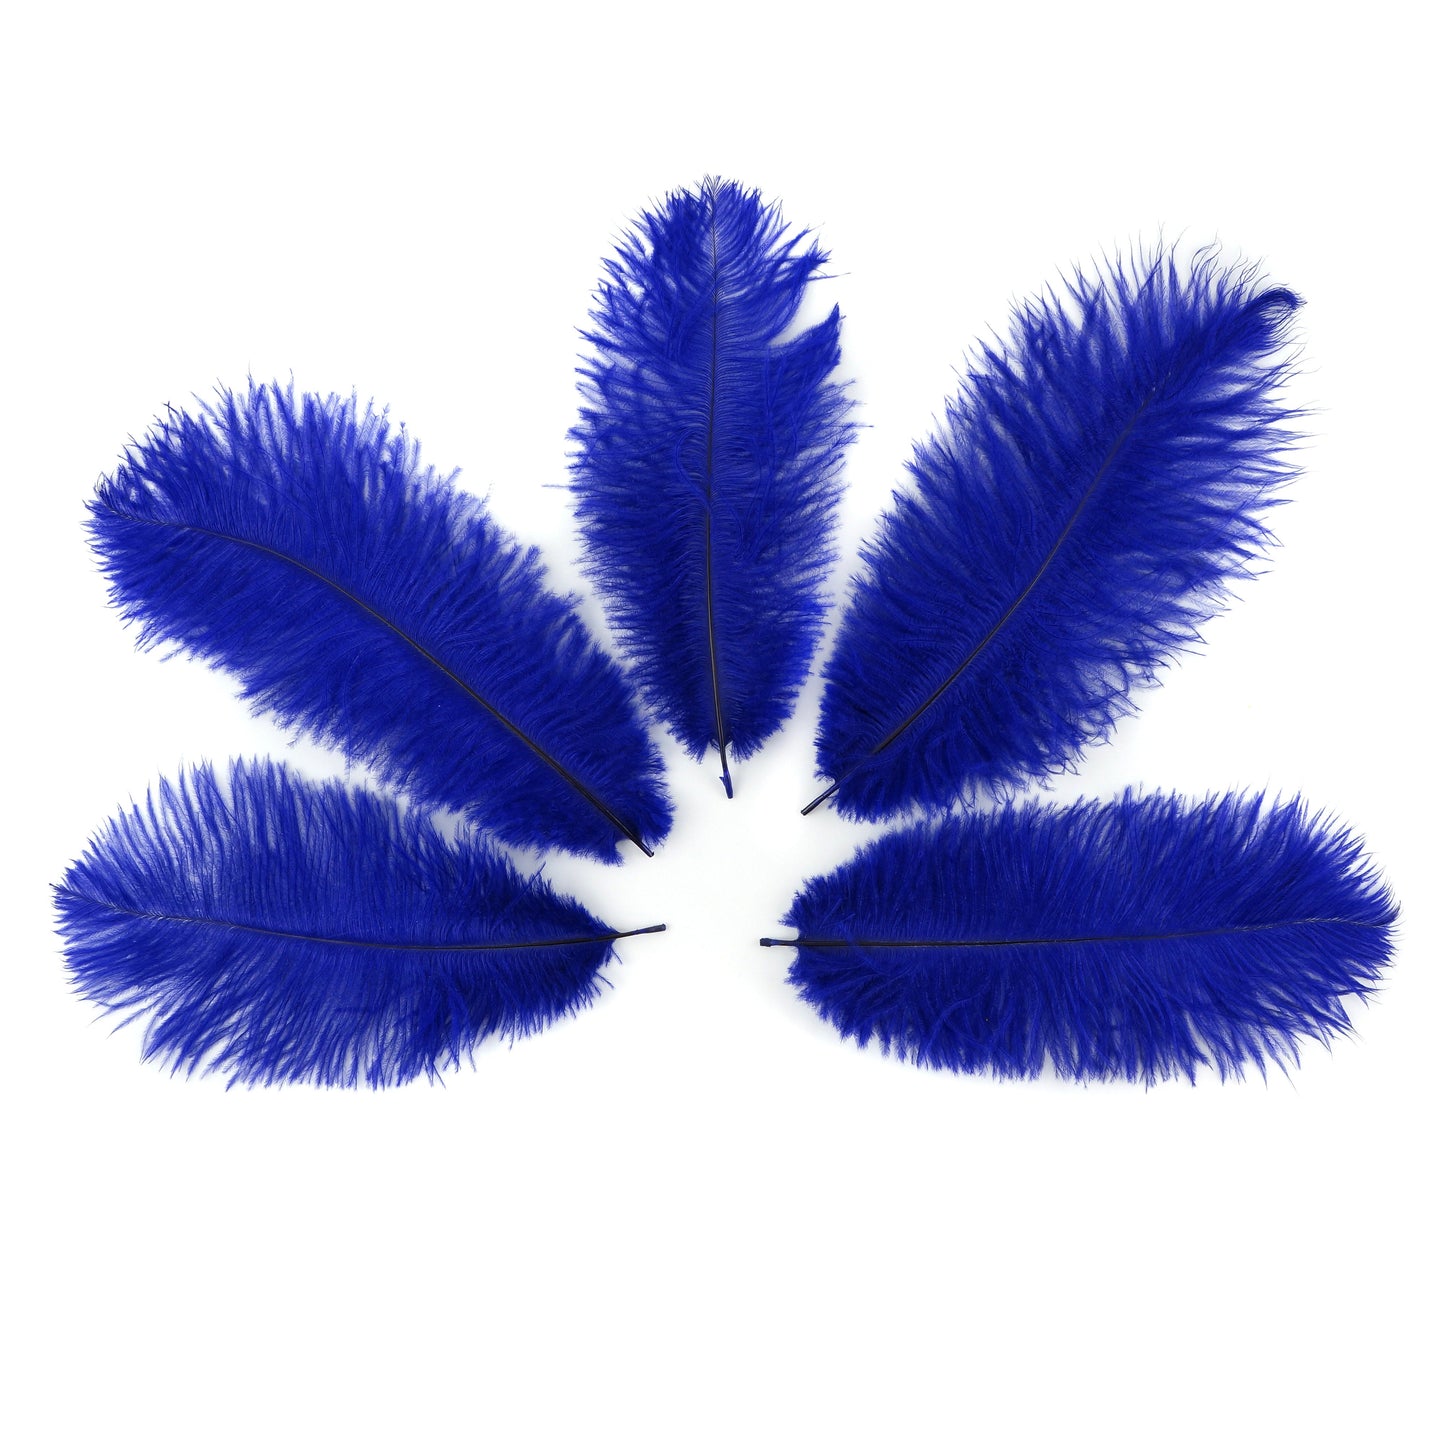 Ostrich Feathers 9-12" Drabs - Regal